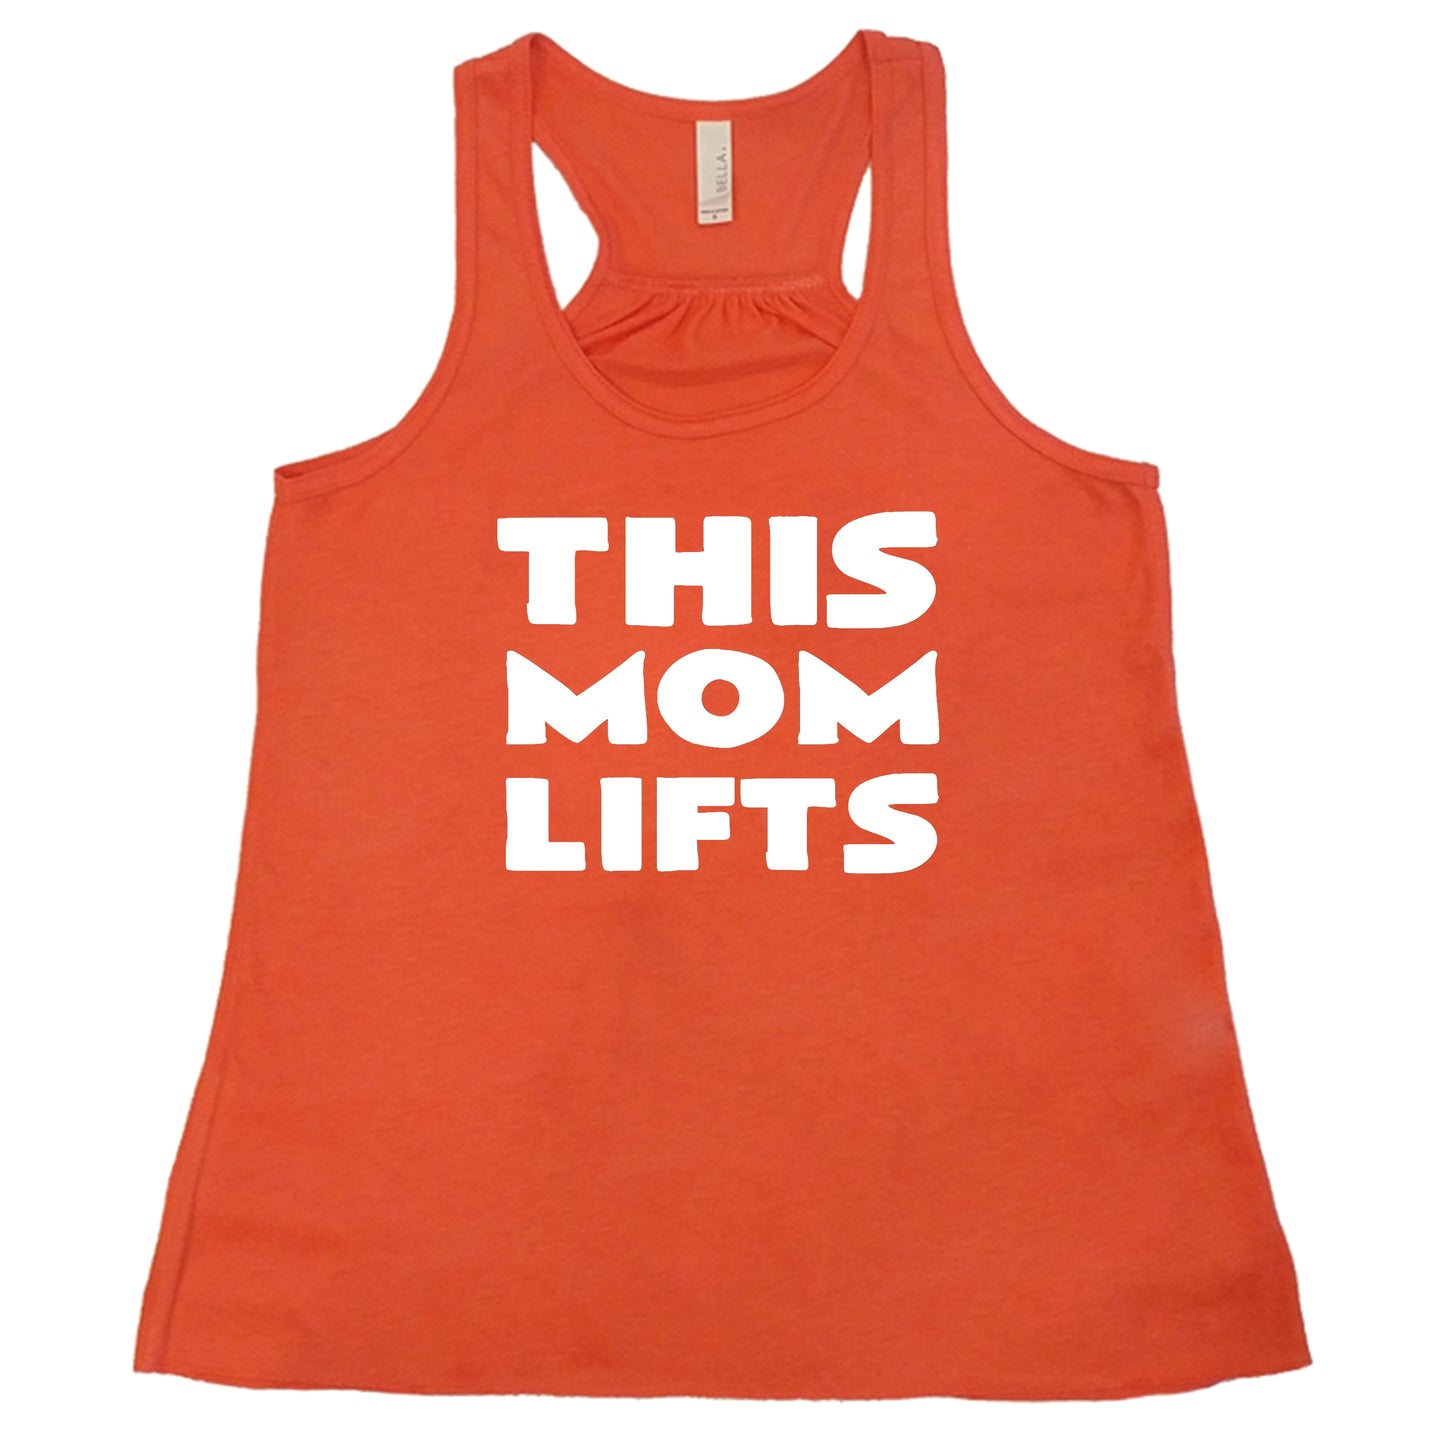 coral racerback shirt with the saying "this mom lifts" in the center in white lettering